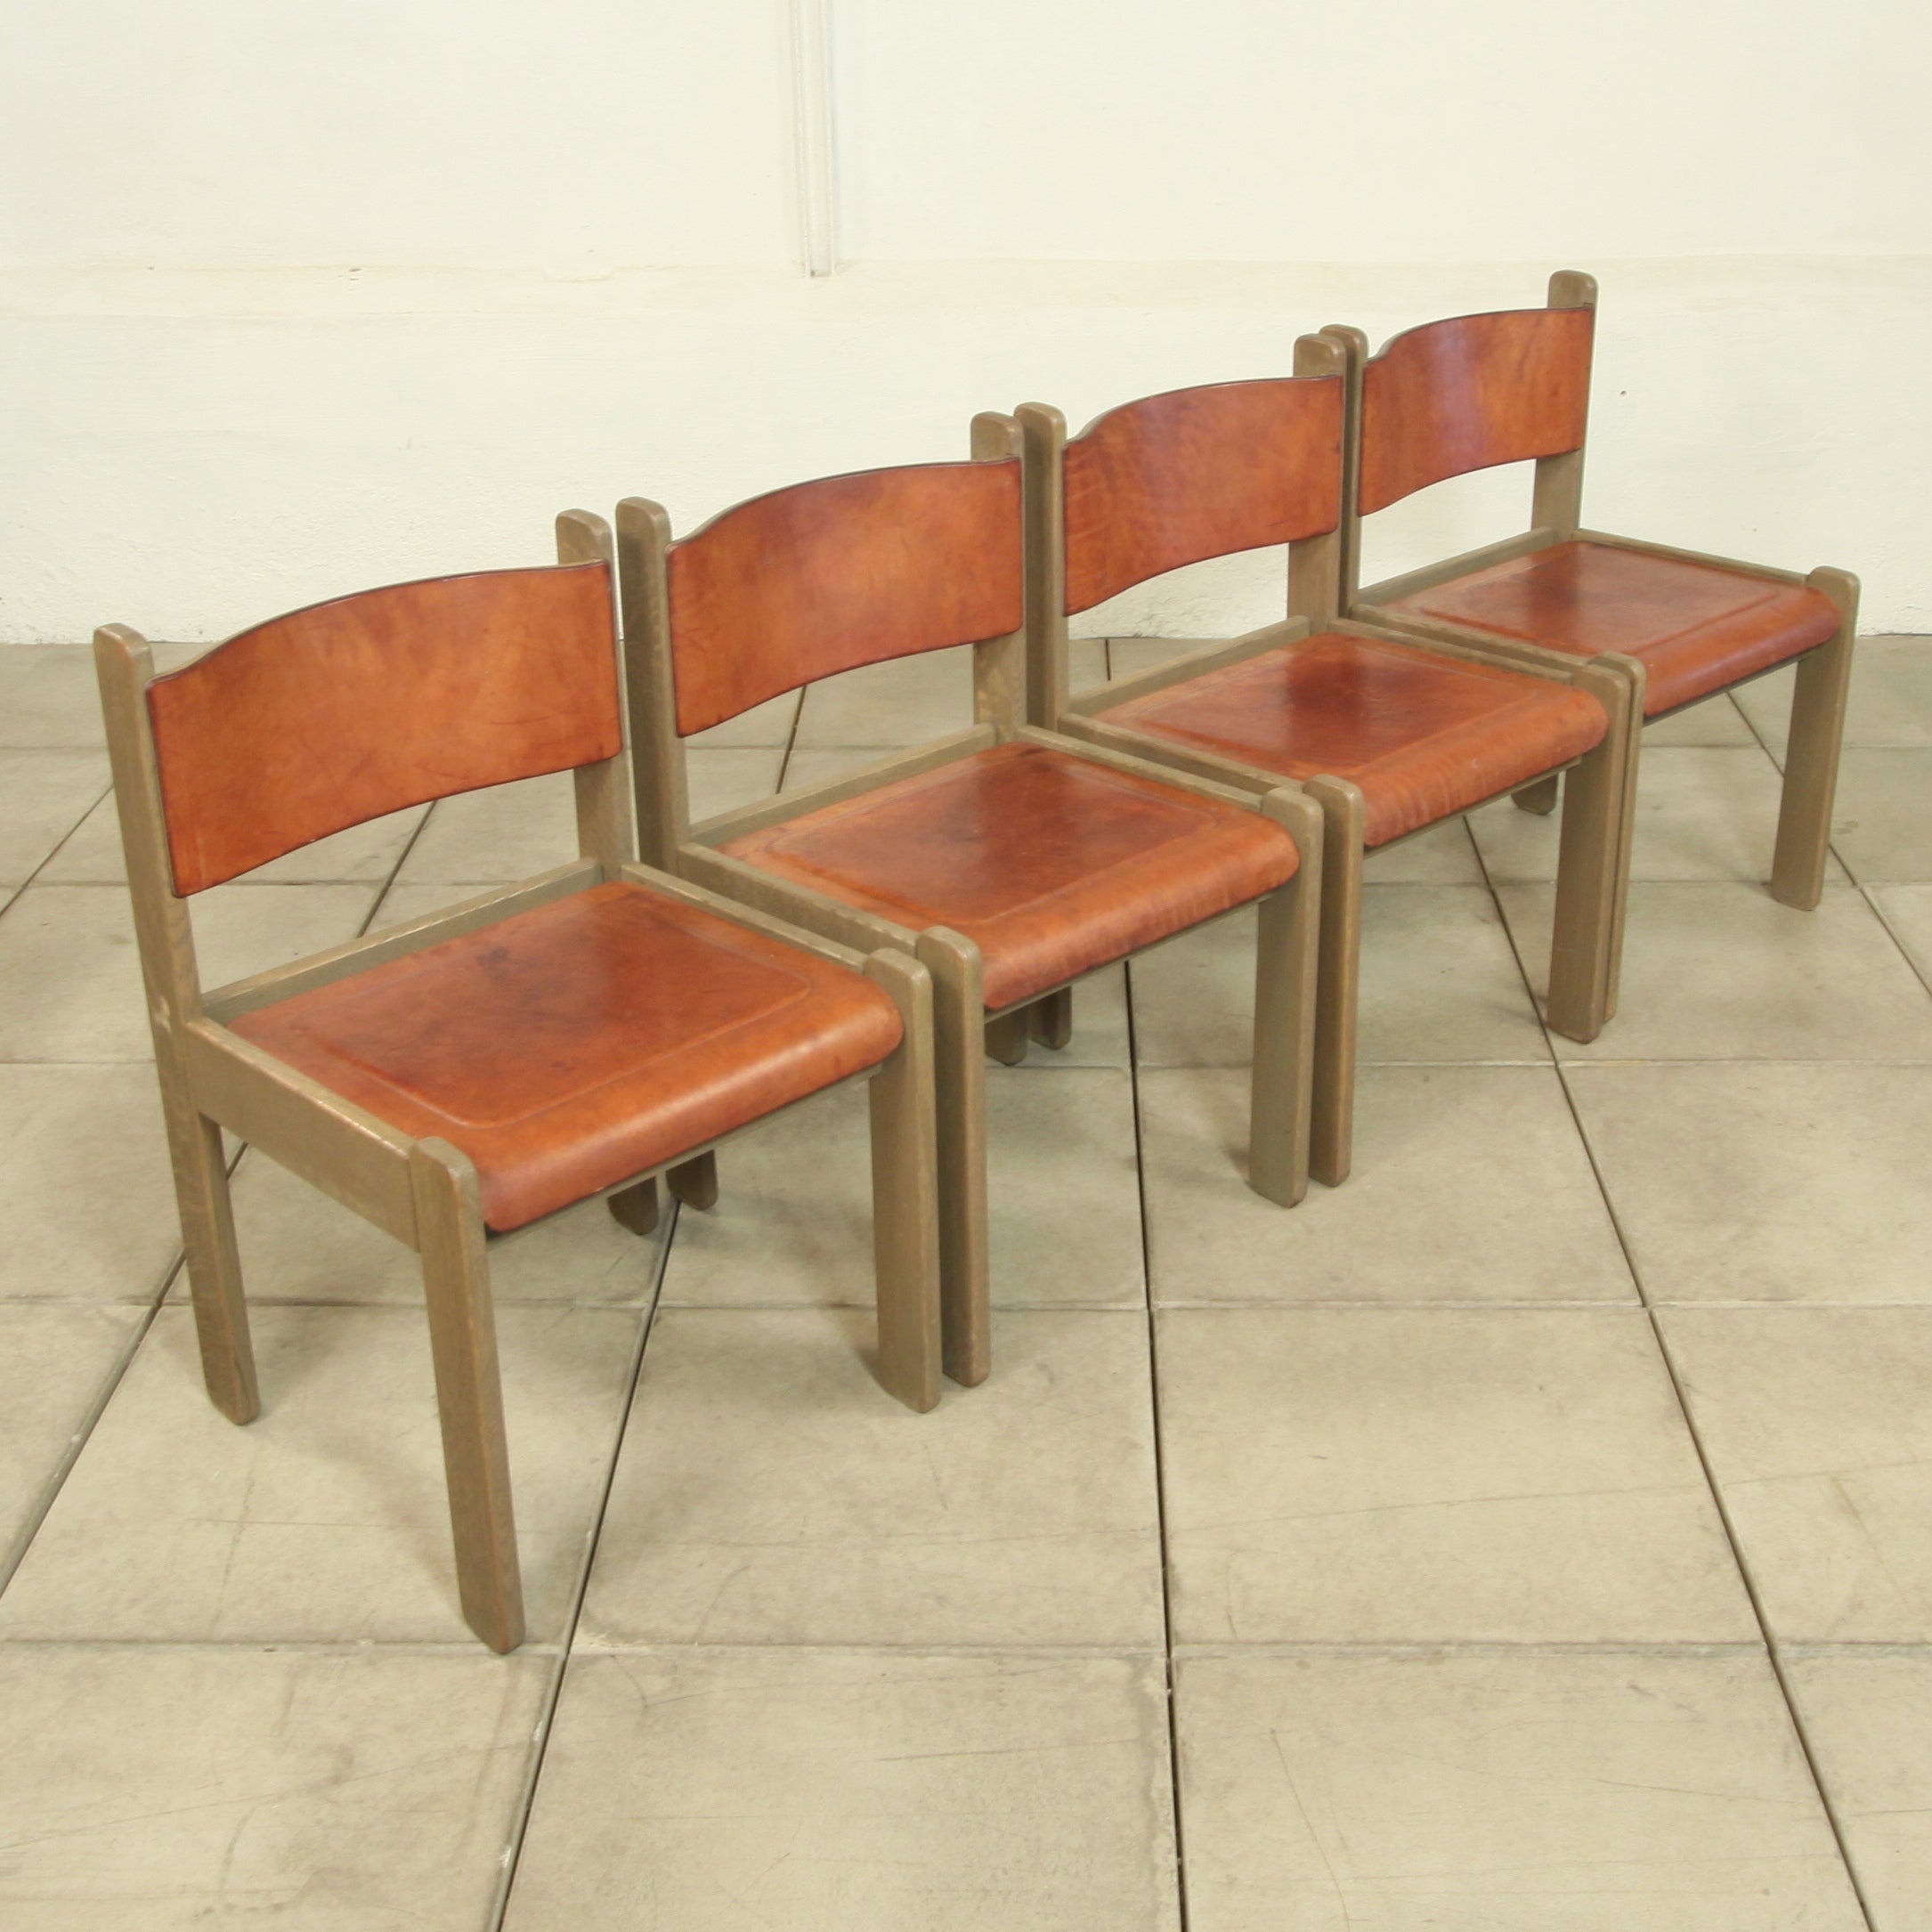 4 Solid Wooden Chairs Upholstered with Thick Heavy Saddleleather